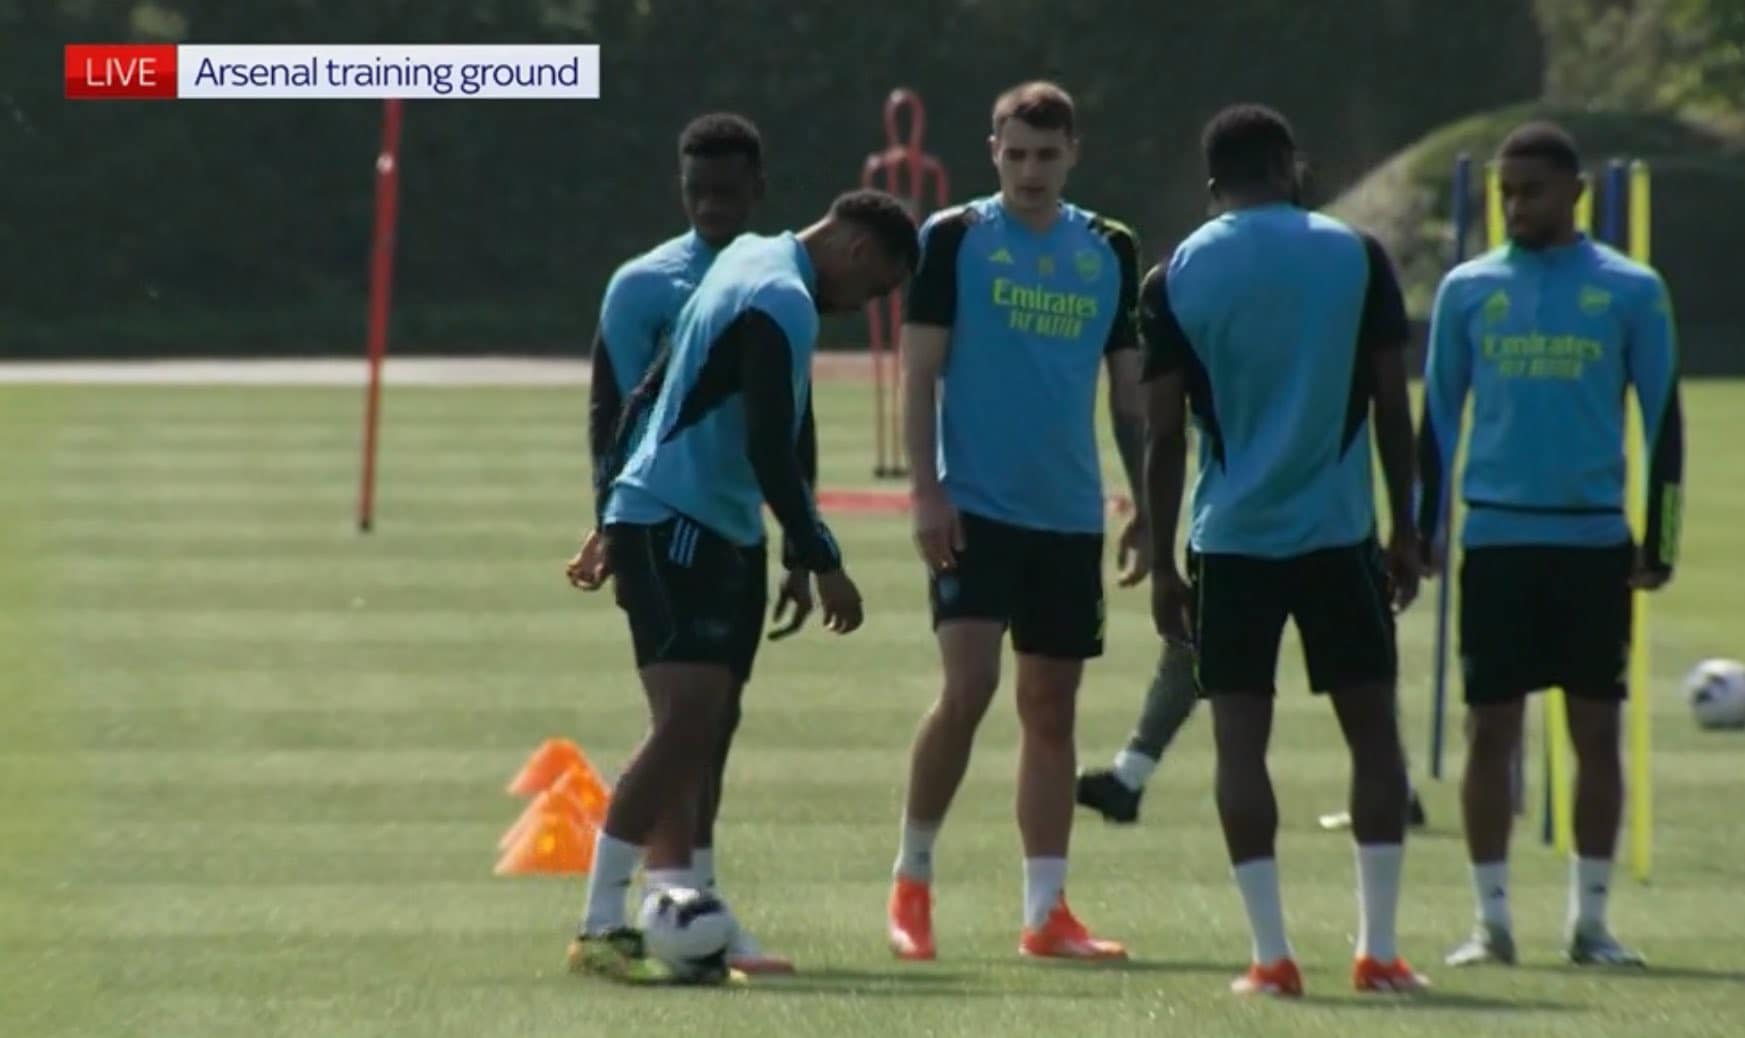 May be an image of 4 people, people playing American football, people playing football, studded shoes and text that says "LIVE Arsenal Arsenaltrainingground training ground"